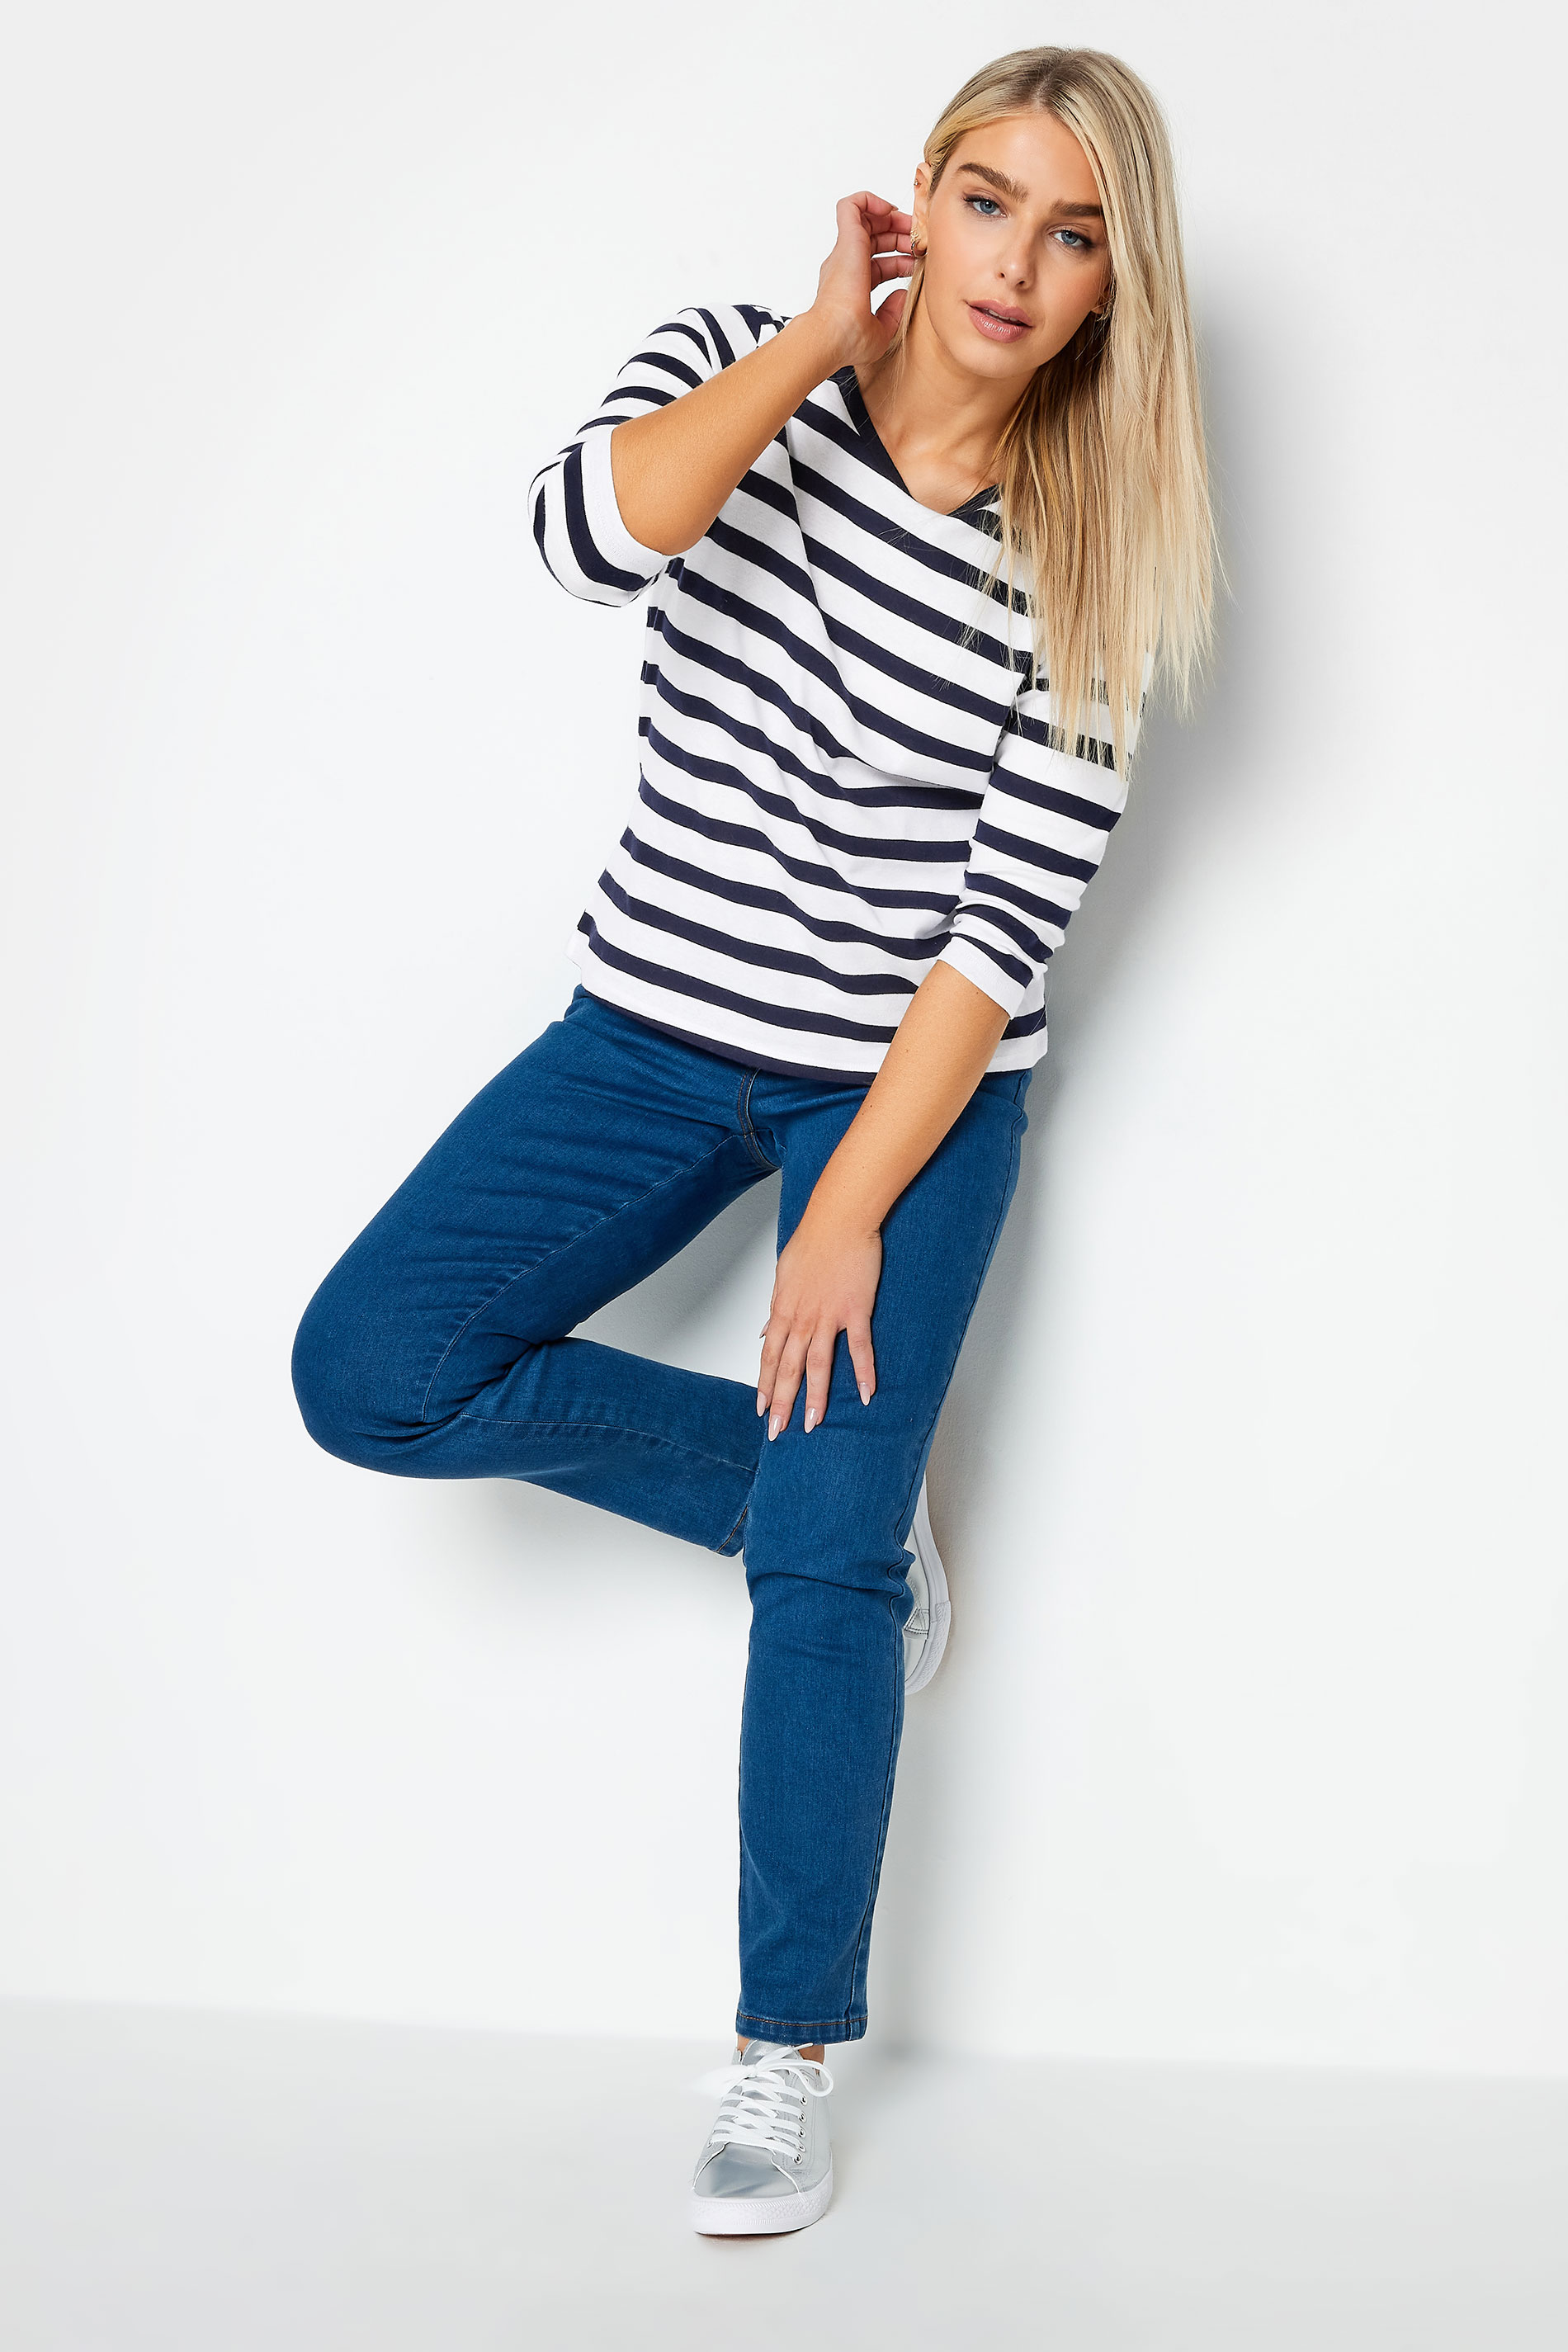 M&Co Navy Blue & Ivory Striped 3/4 Sleeve Cotton Top | M&Co 2